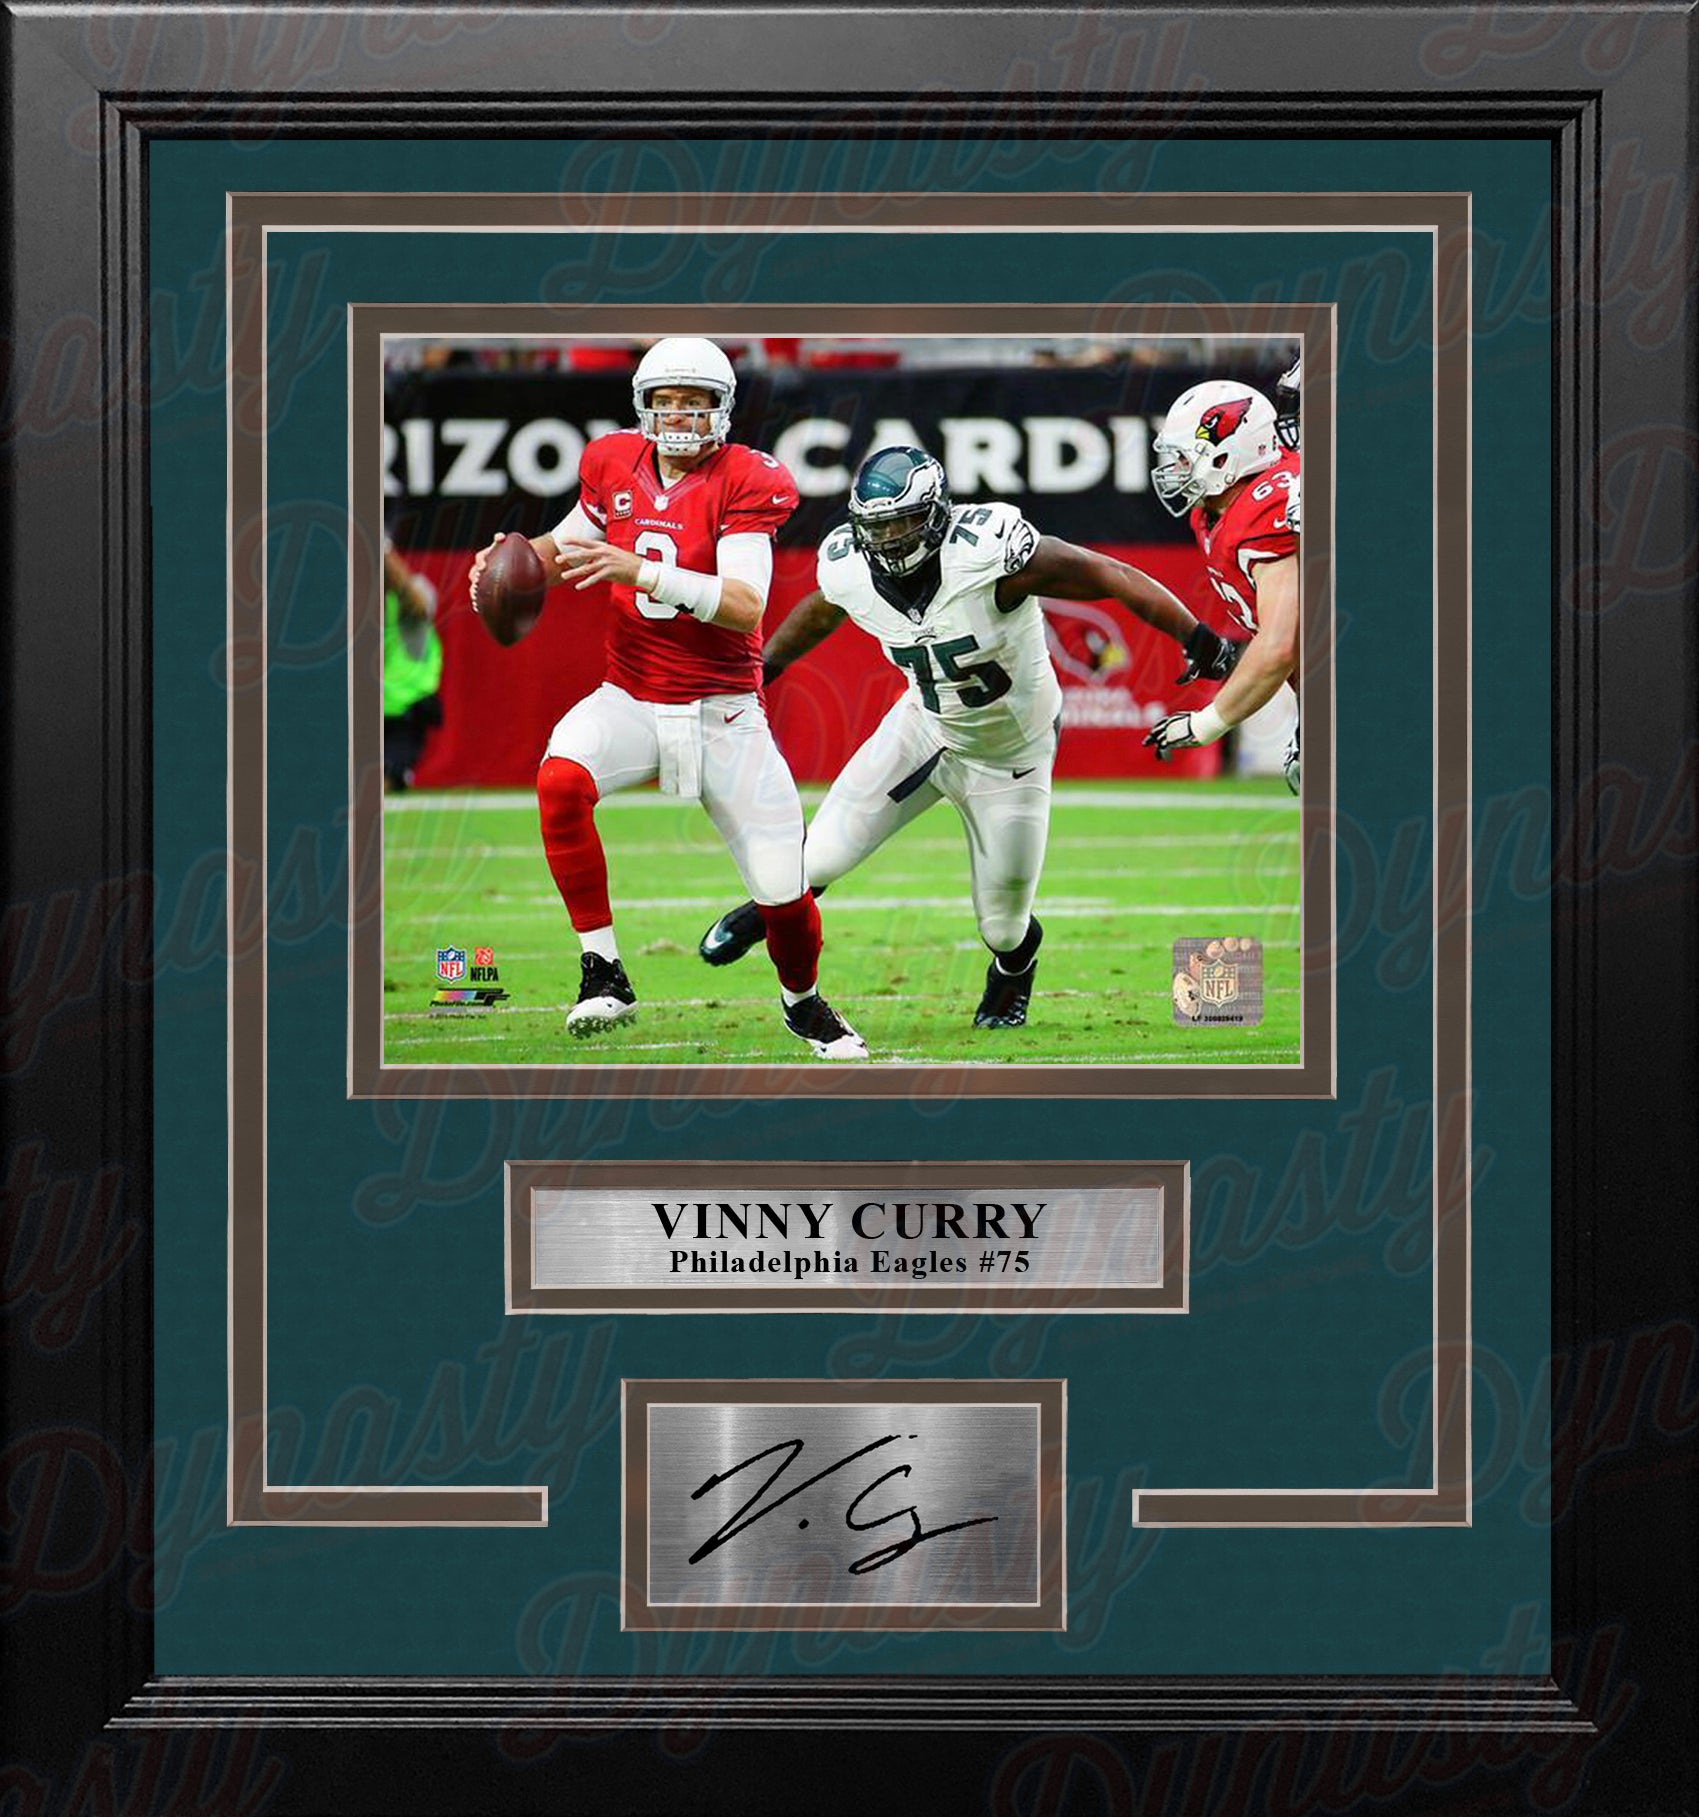 Vinny Curry in Action Philadelphia Eagles Framed Football Photo with Engraved Autograph - Dynasty Sports & Framing 